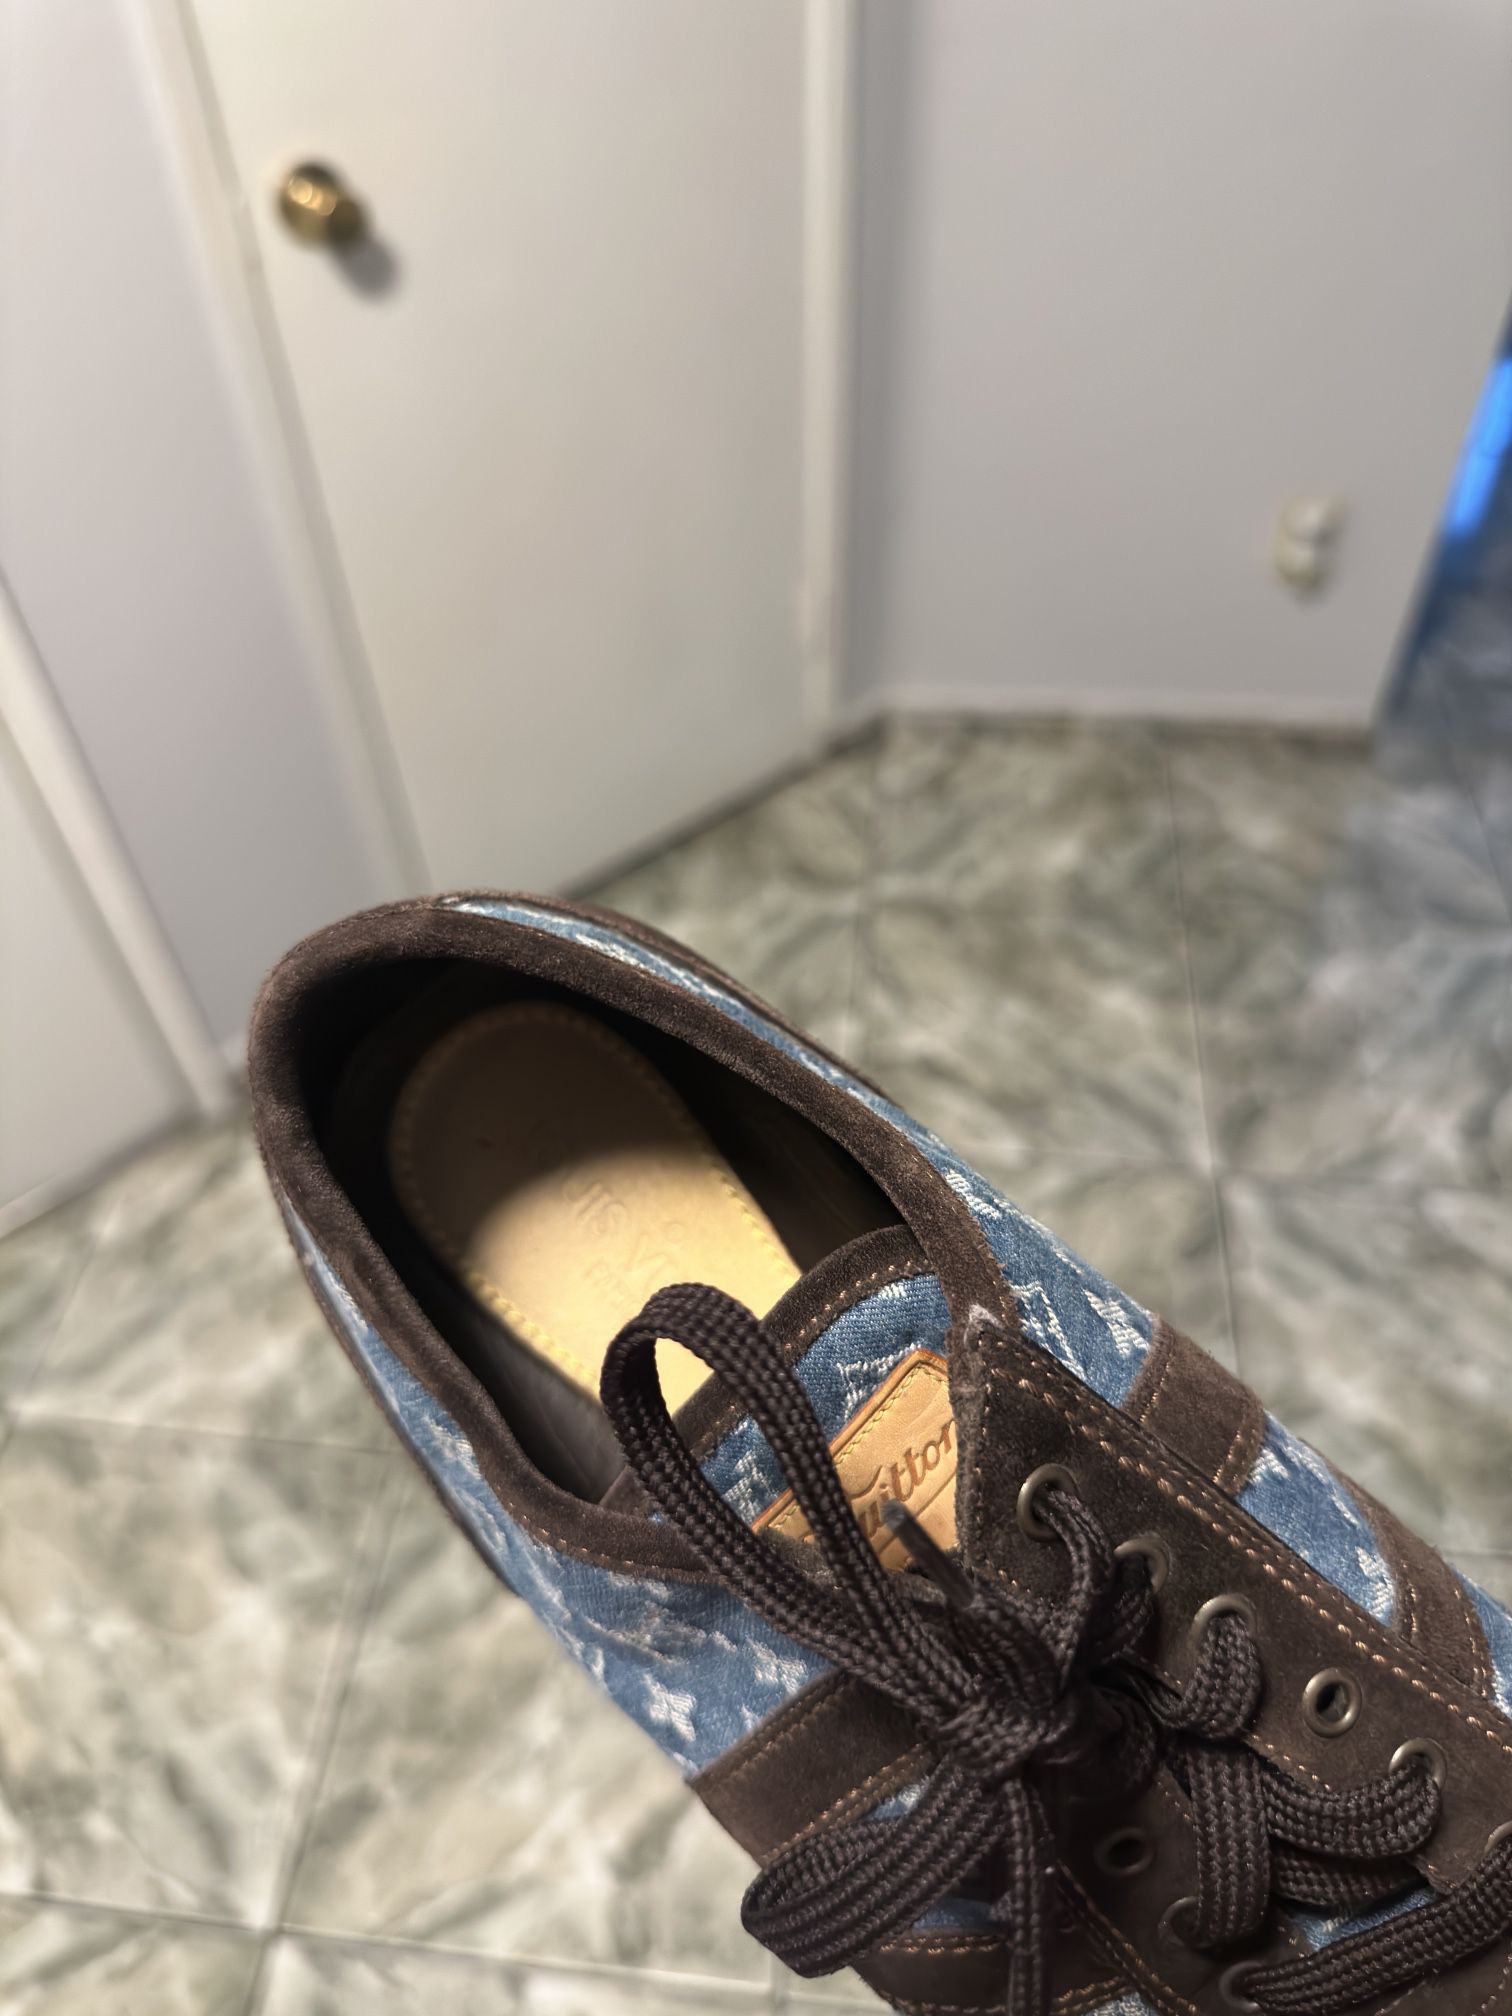 Louis Vuitton Trainer Low Size 9 Men for Sale in Perris, CA - OfferUp